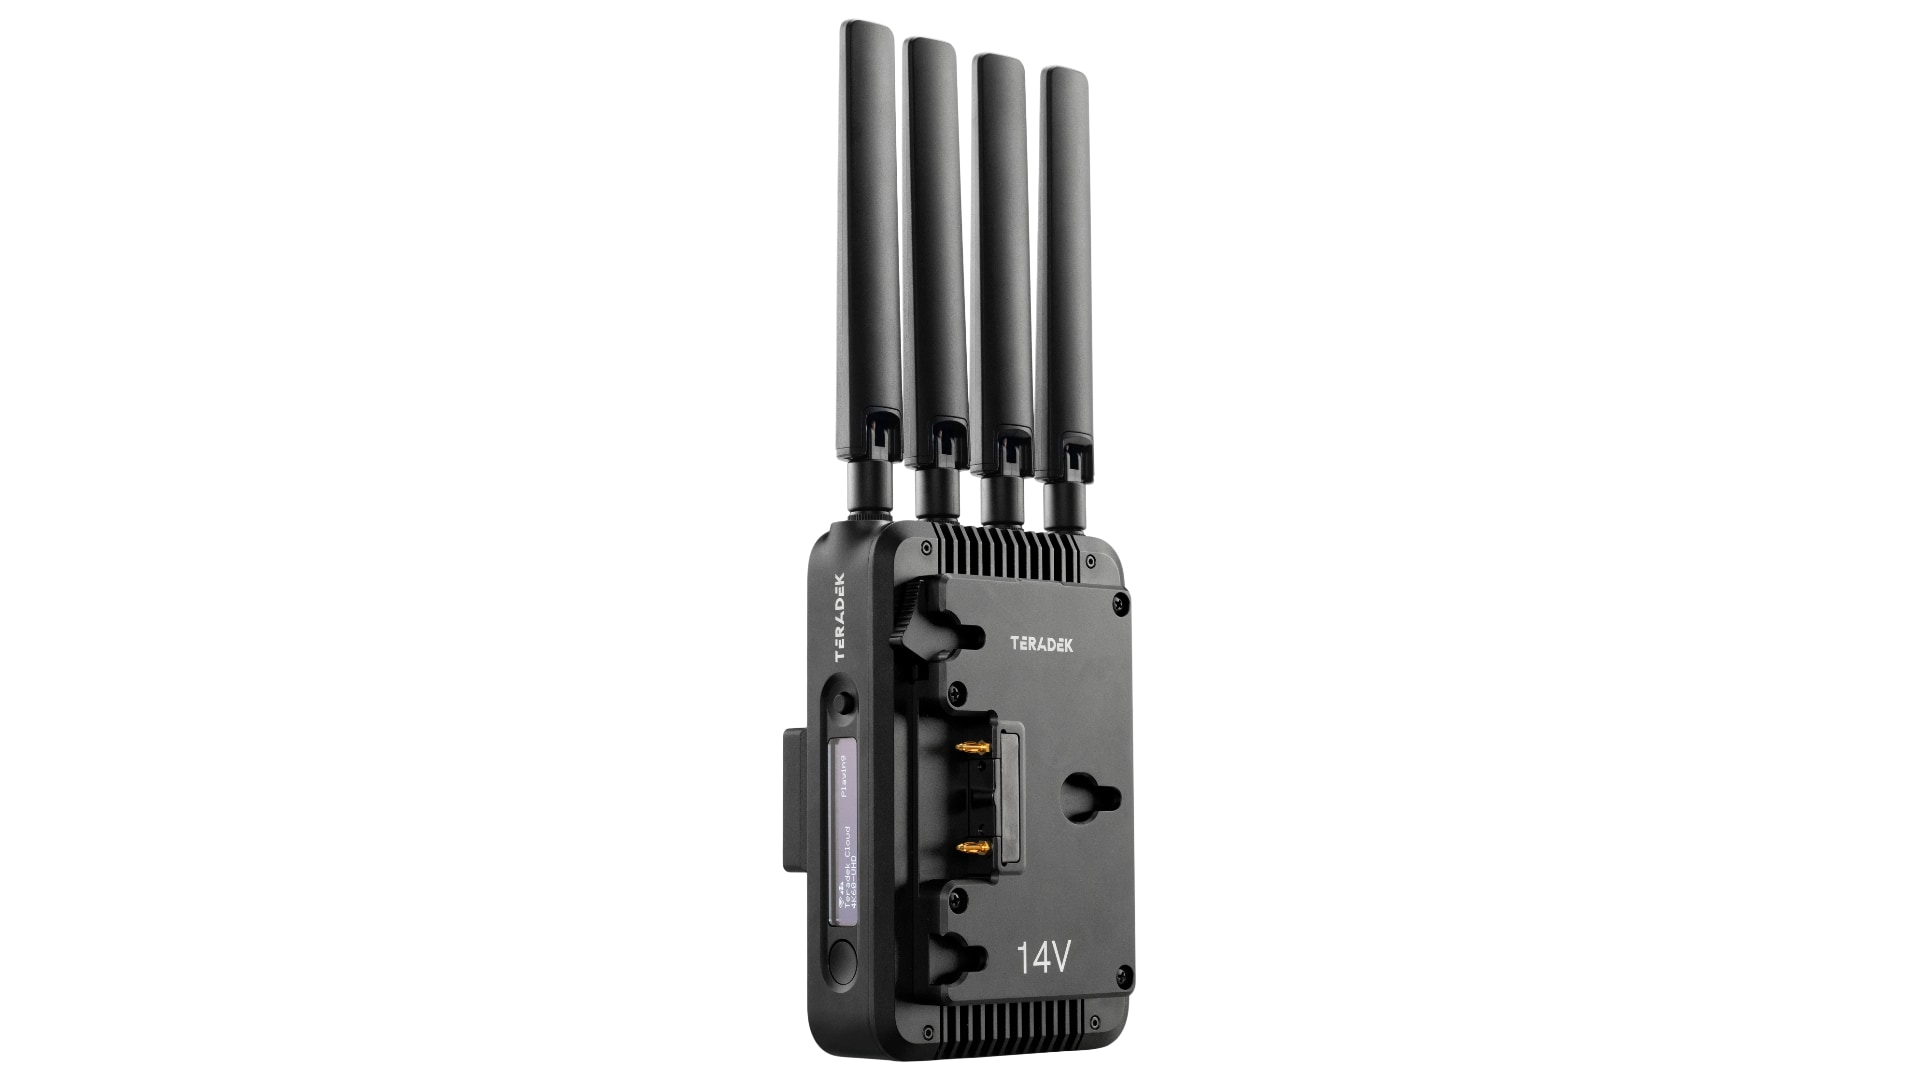 Also available in V-mount, the new Teradek Prism Mobile 